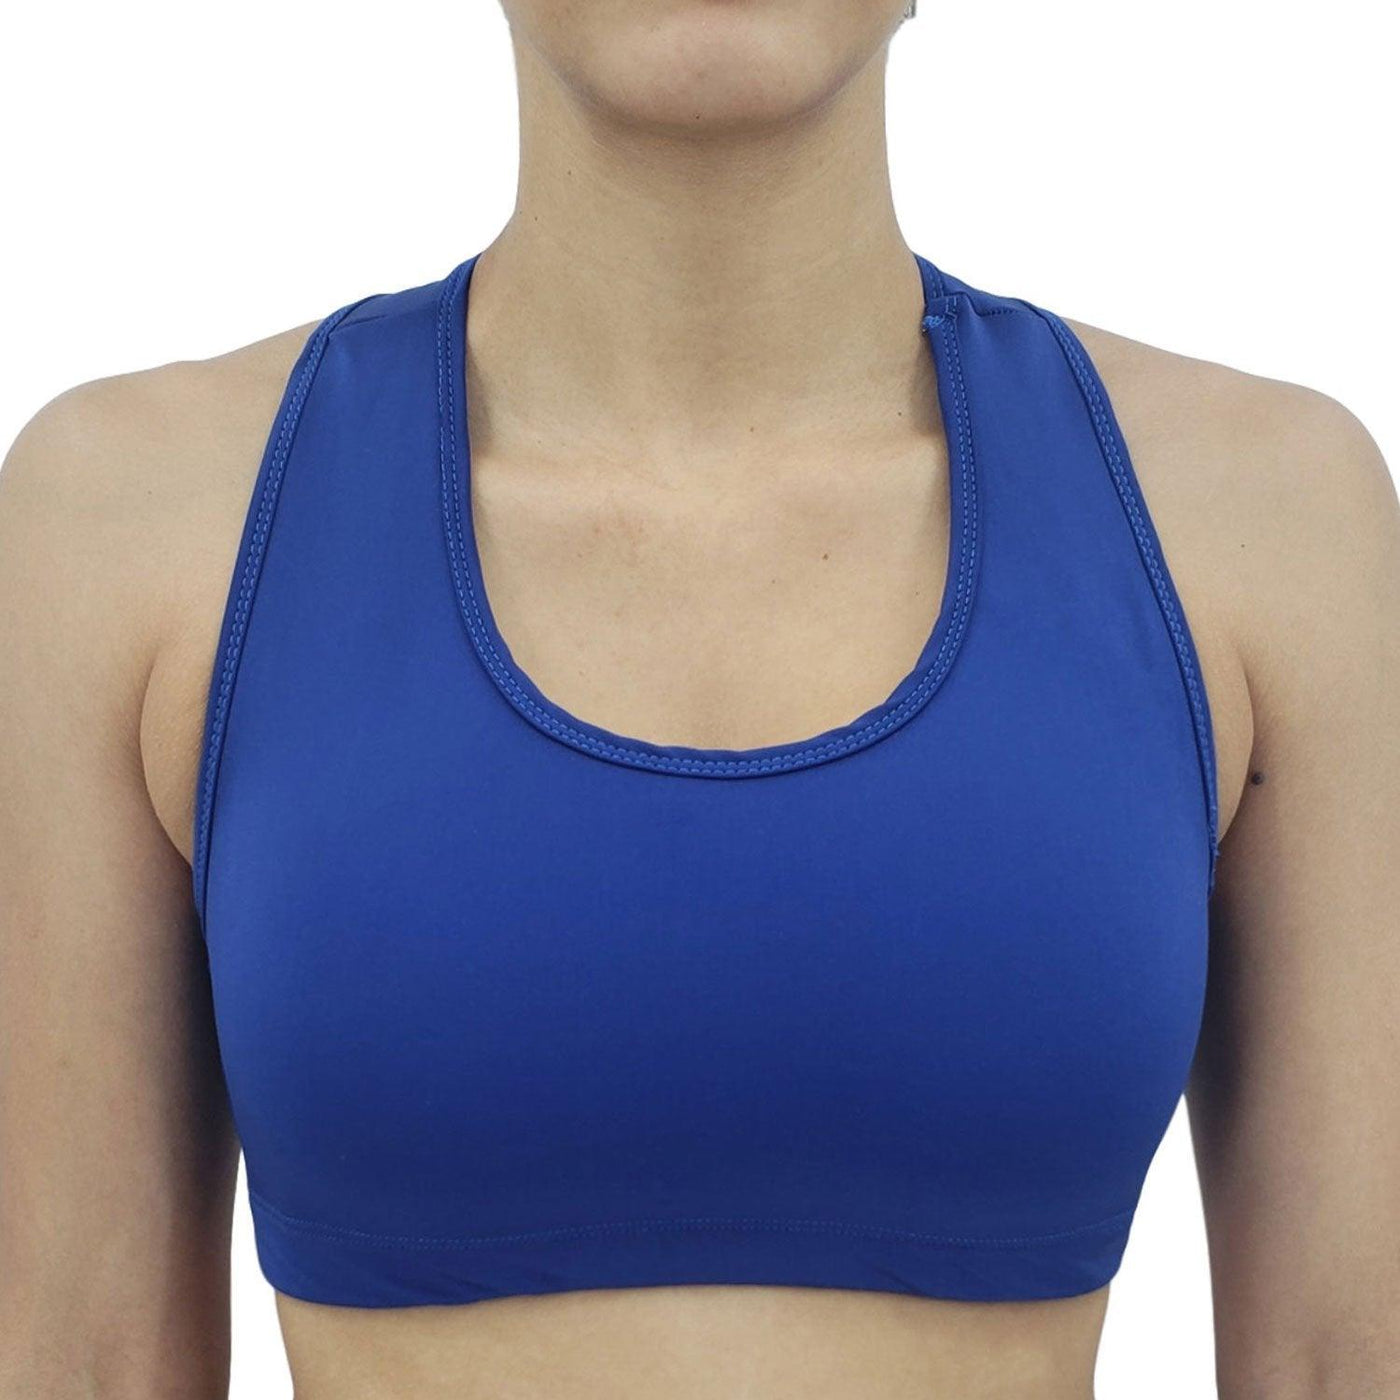 Blueberry Solid Color Sports Bra - Buy a Dream